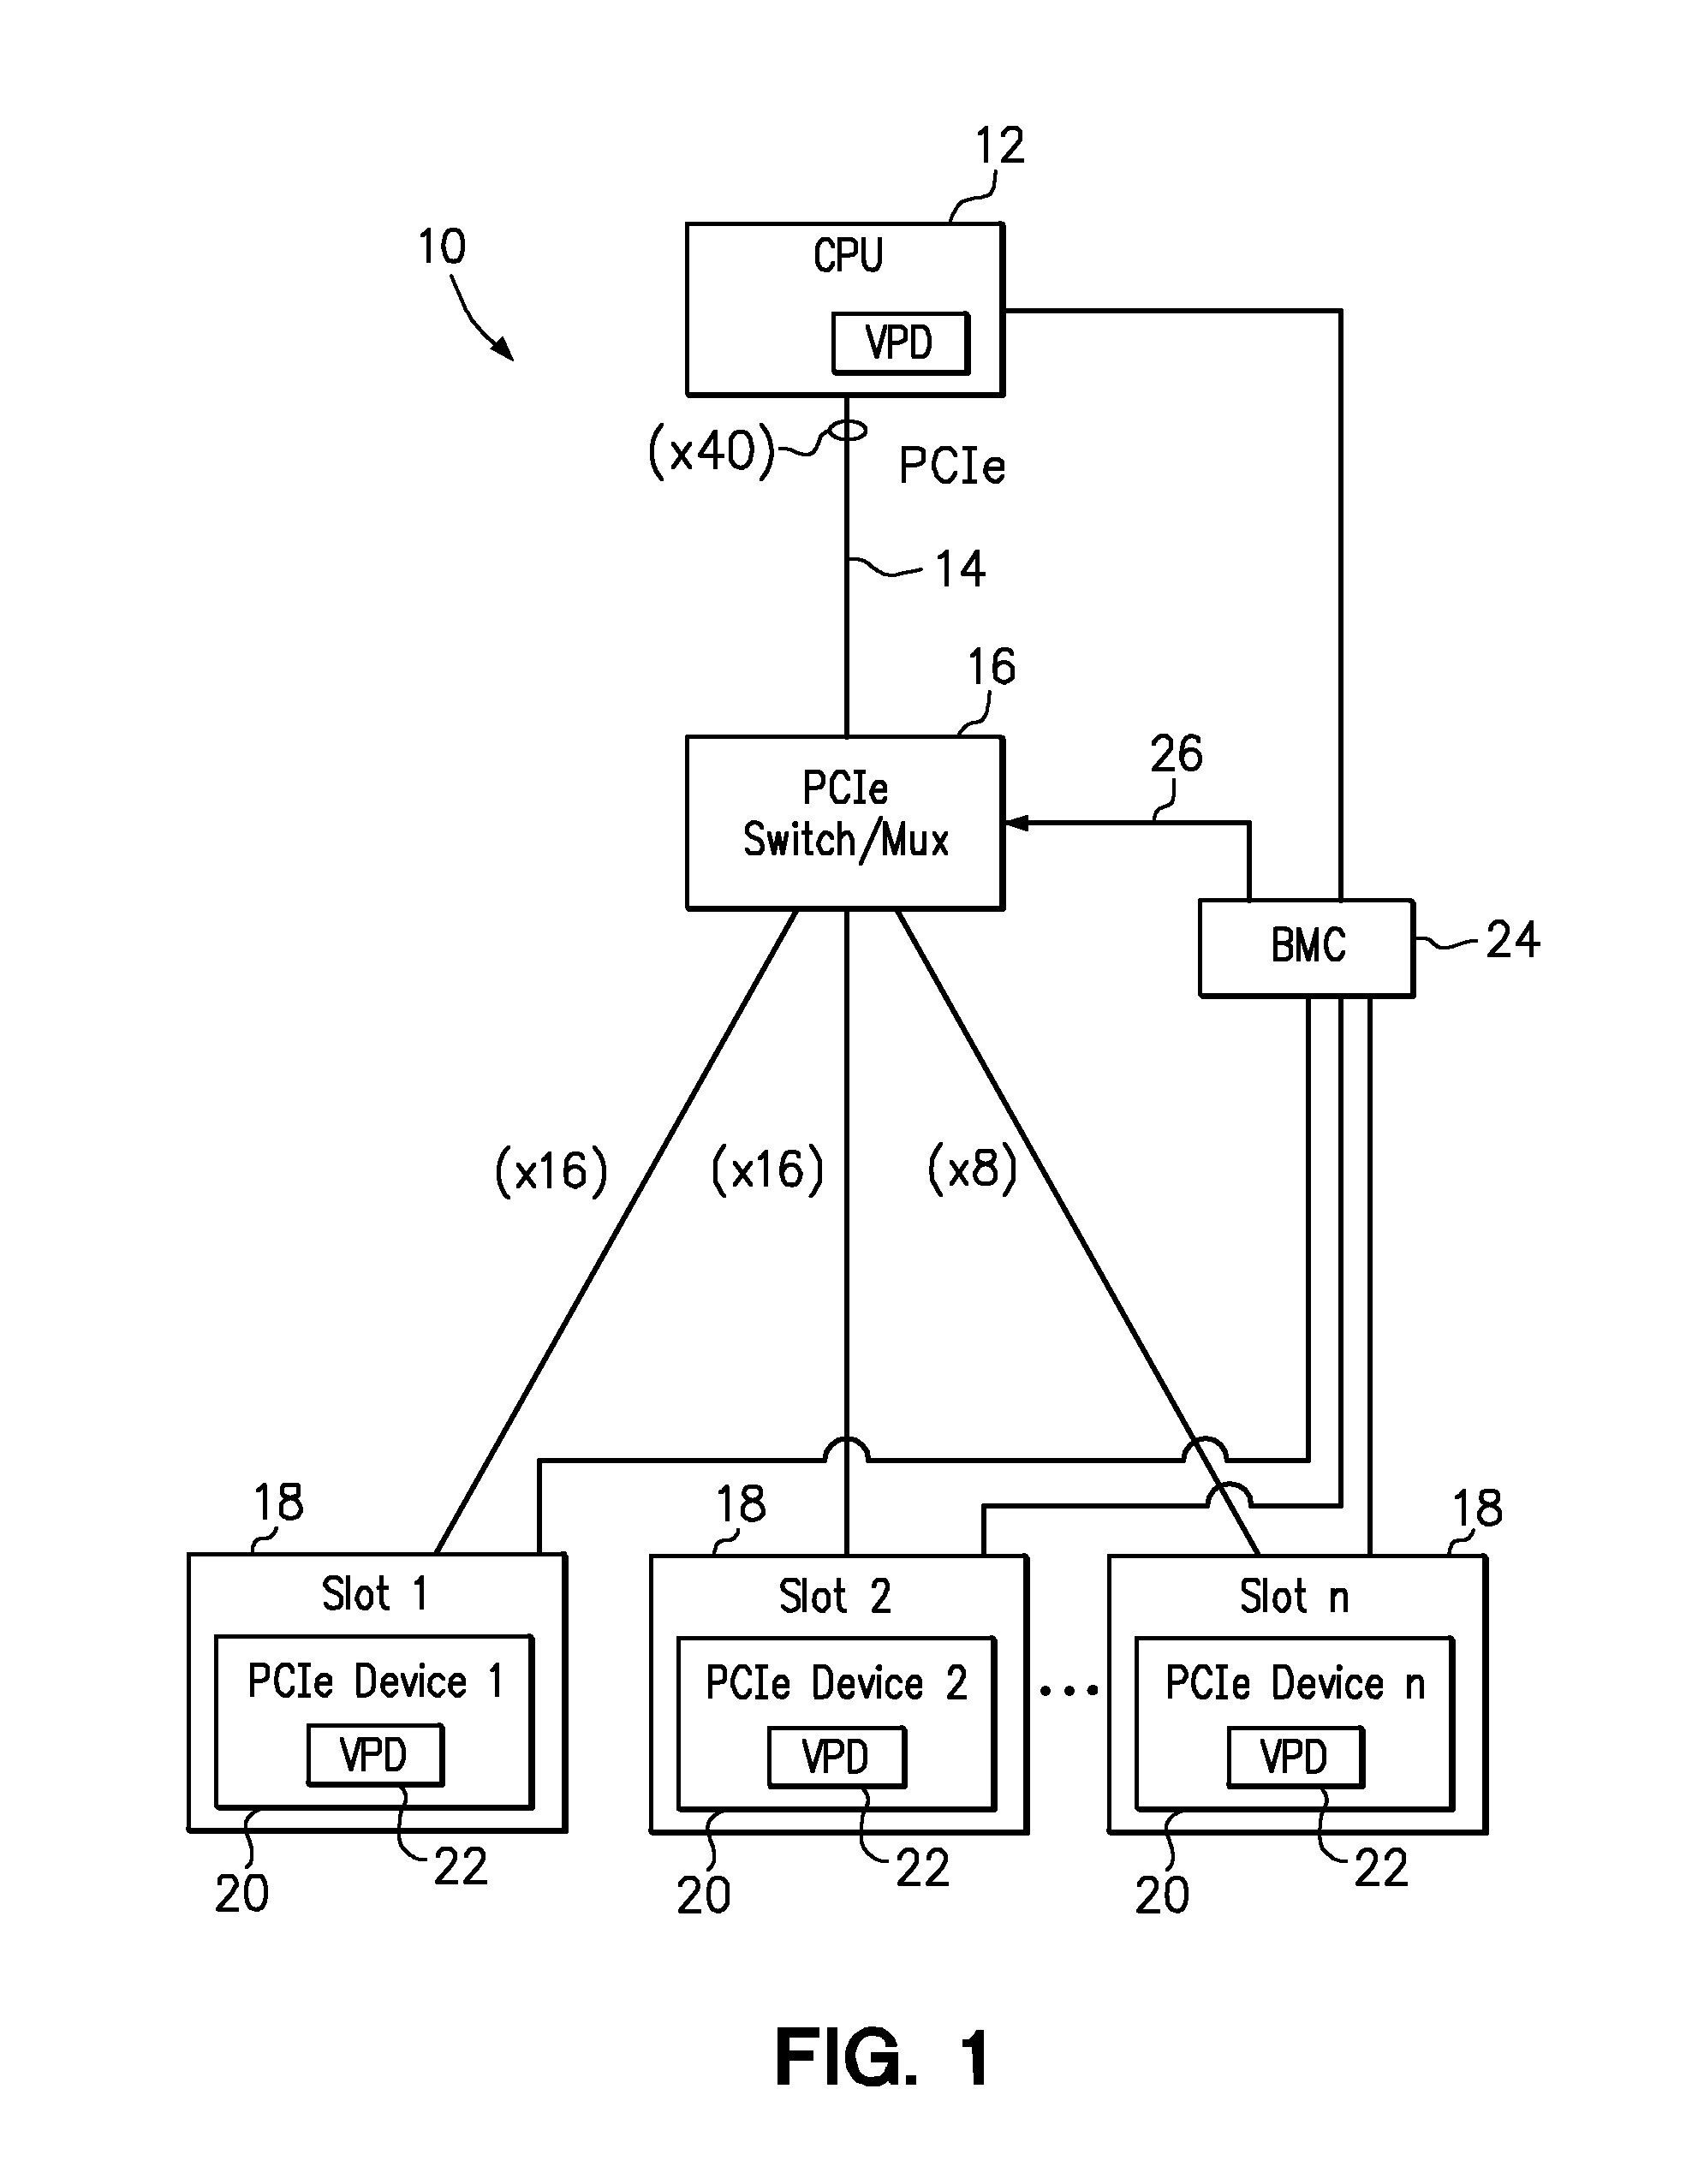 Allocating lanes of a serial computer expansion bus among installed devices